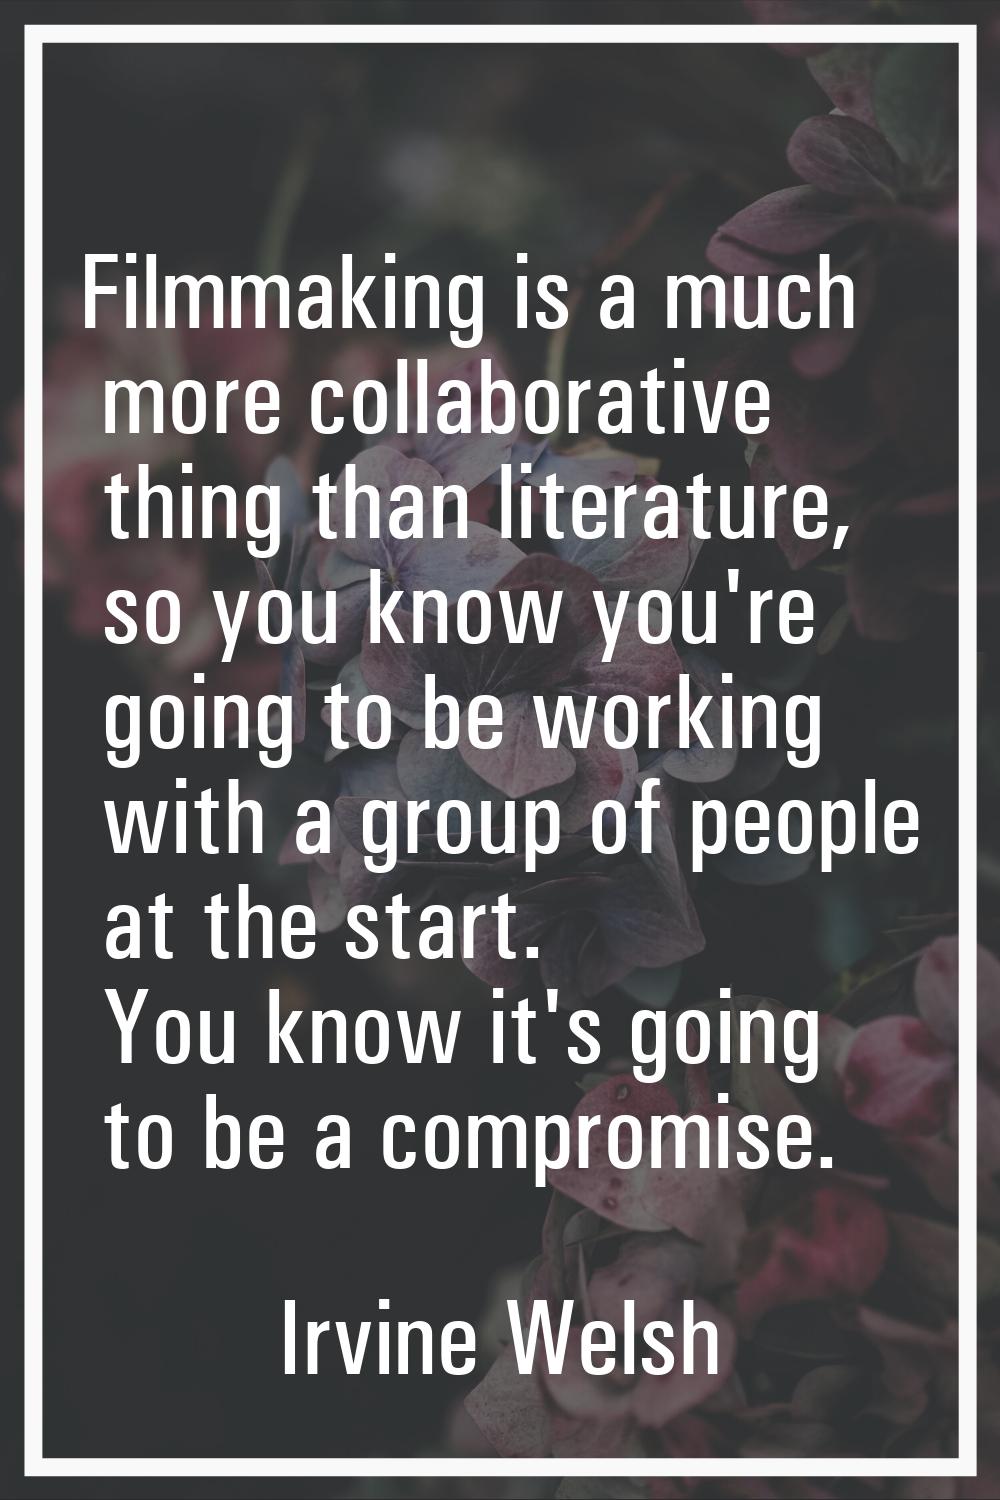 Filmmaking is a much more collaborative thing than literature, so you know you're going to be worki